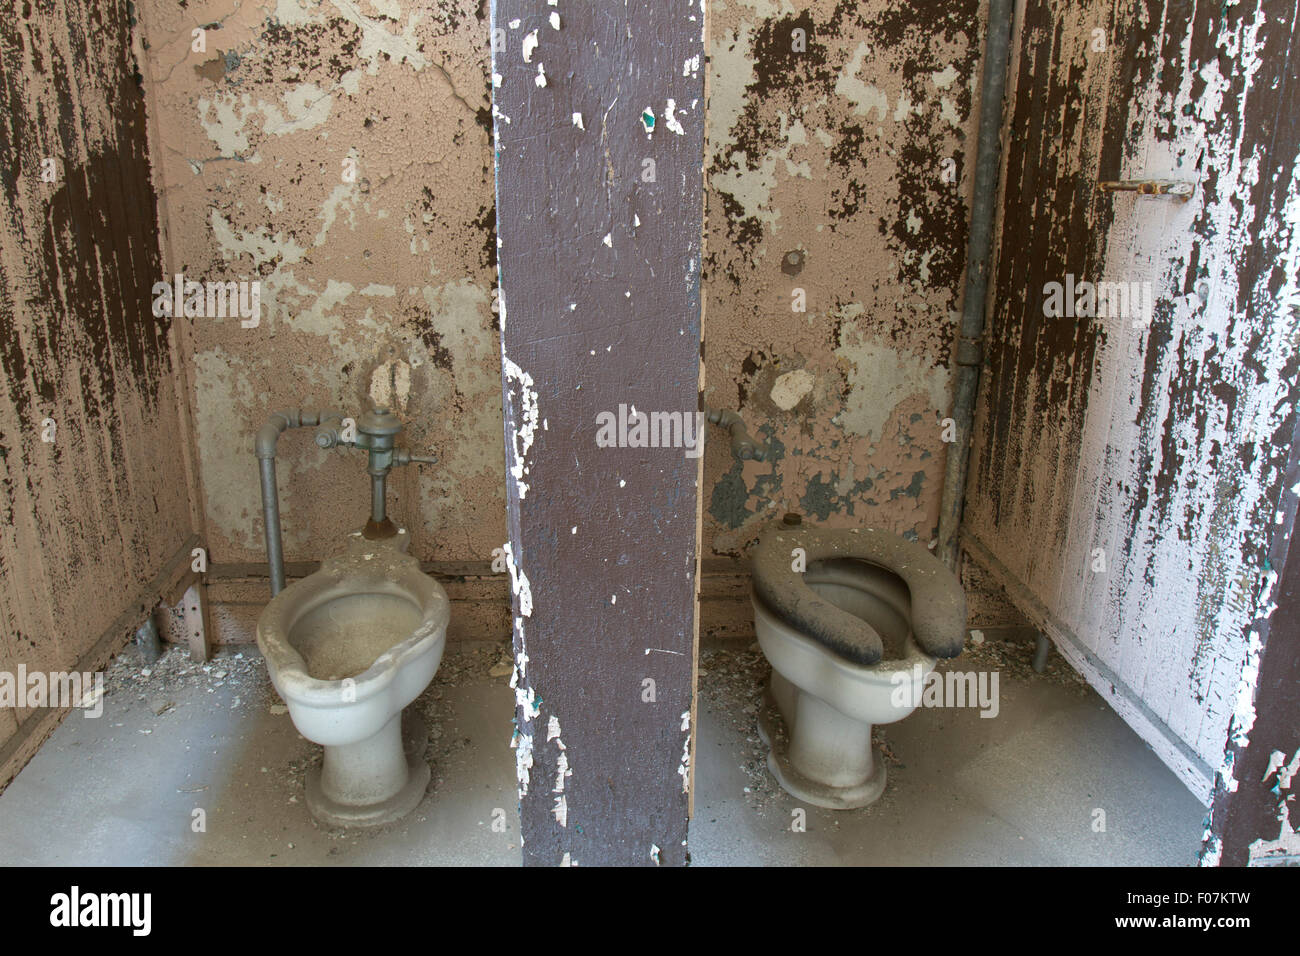 Bathroom Stall Dirty High Resolution Stock Photography And Images Alamy